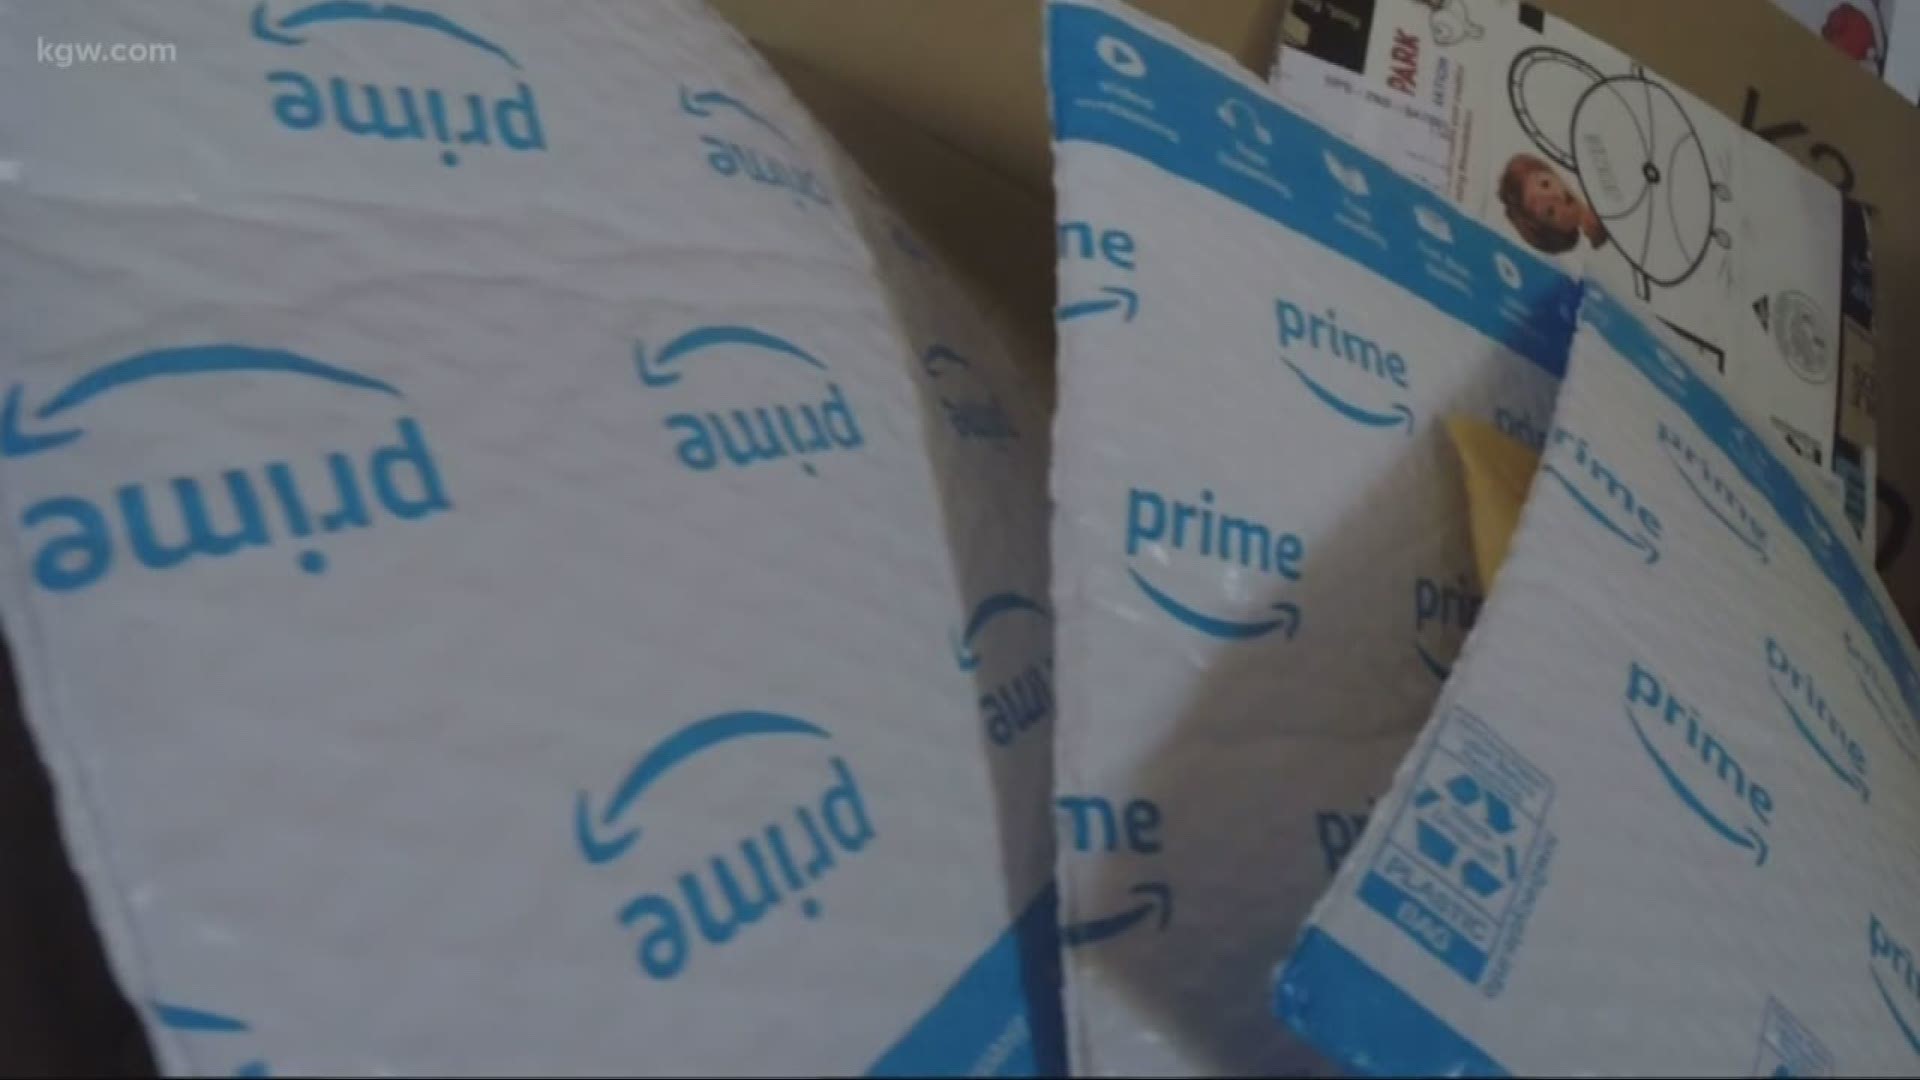 A couple of roommates in NE Portland say they’ve been getting Amazon packages in their name for about two weeks, packages they didn’t order or pay for, and that have some pretty random stuff inside.